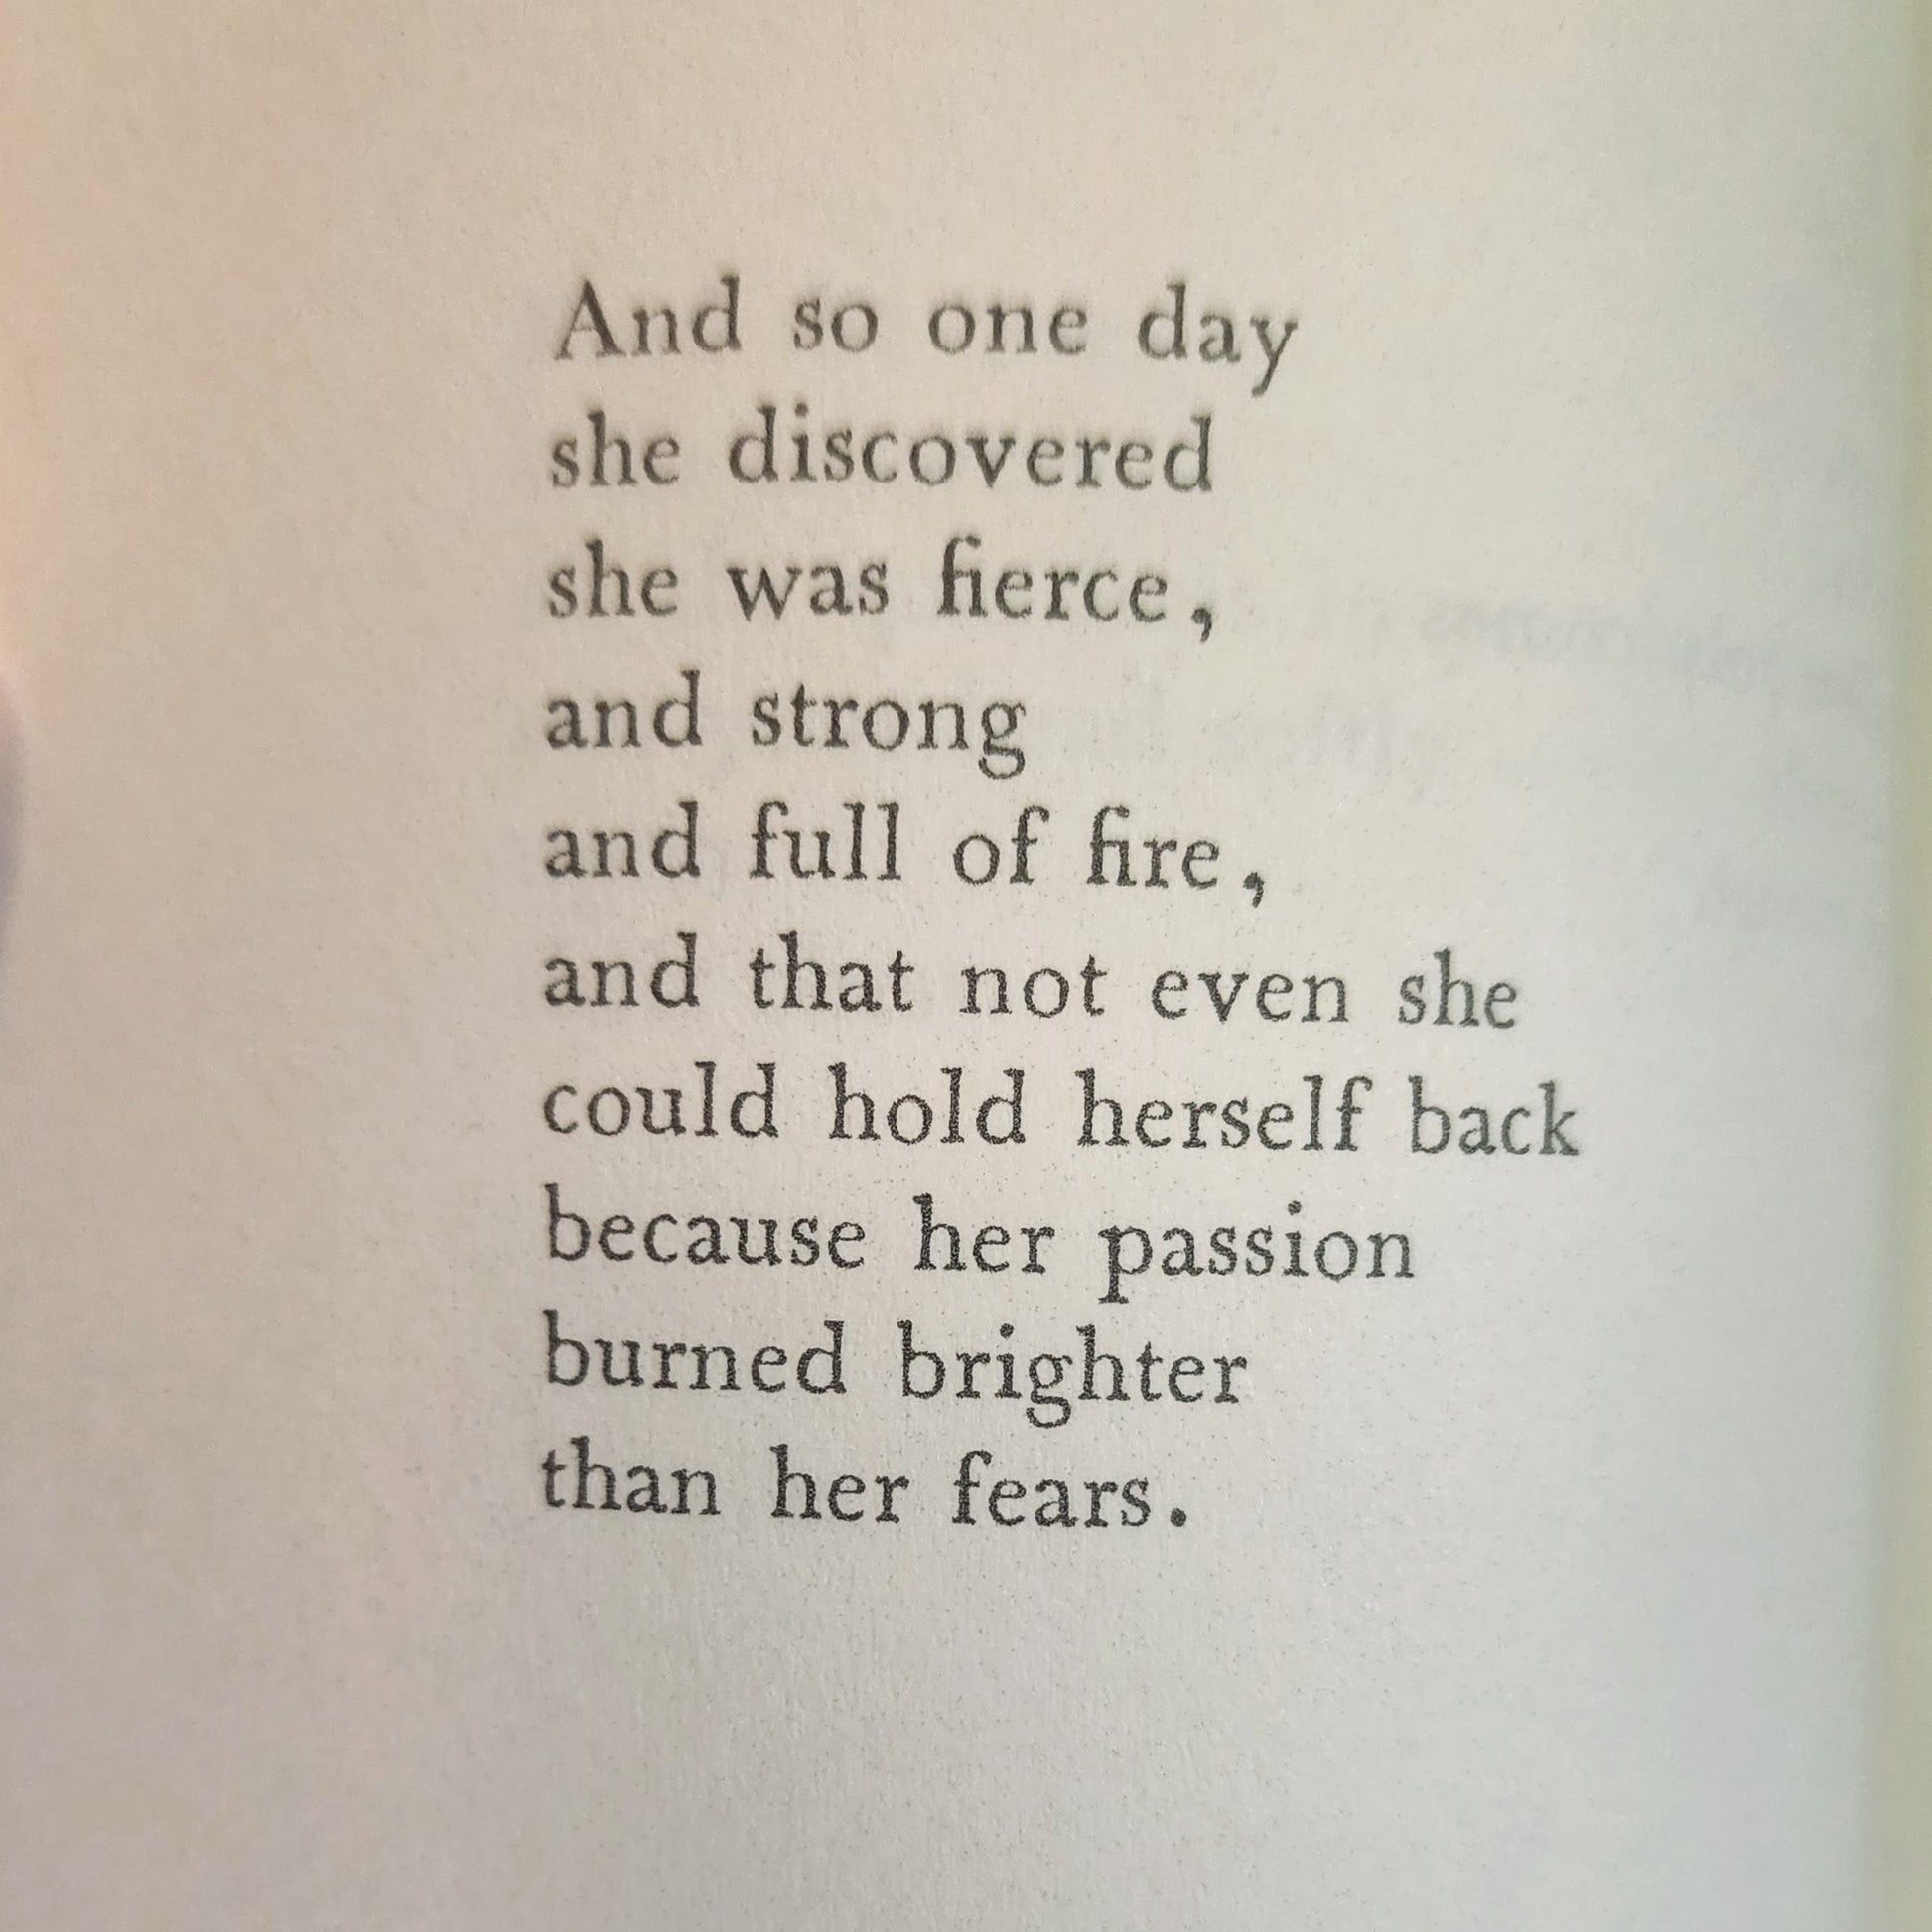 Mark Anthony - And one day she discovered that she was fierce, and strong,  and full of fire, and that not even she could hold herself back because her  passion burned brighter